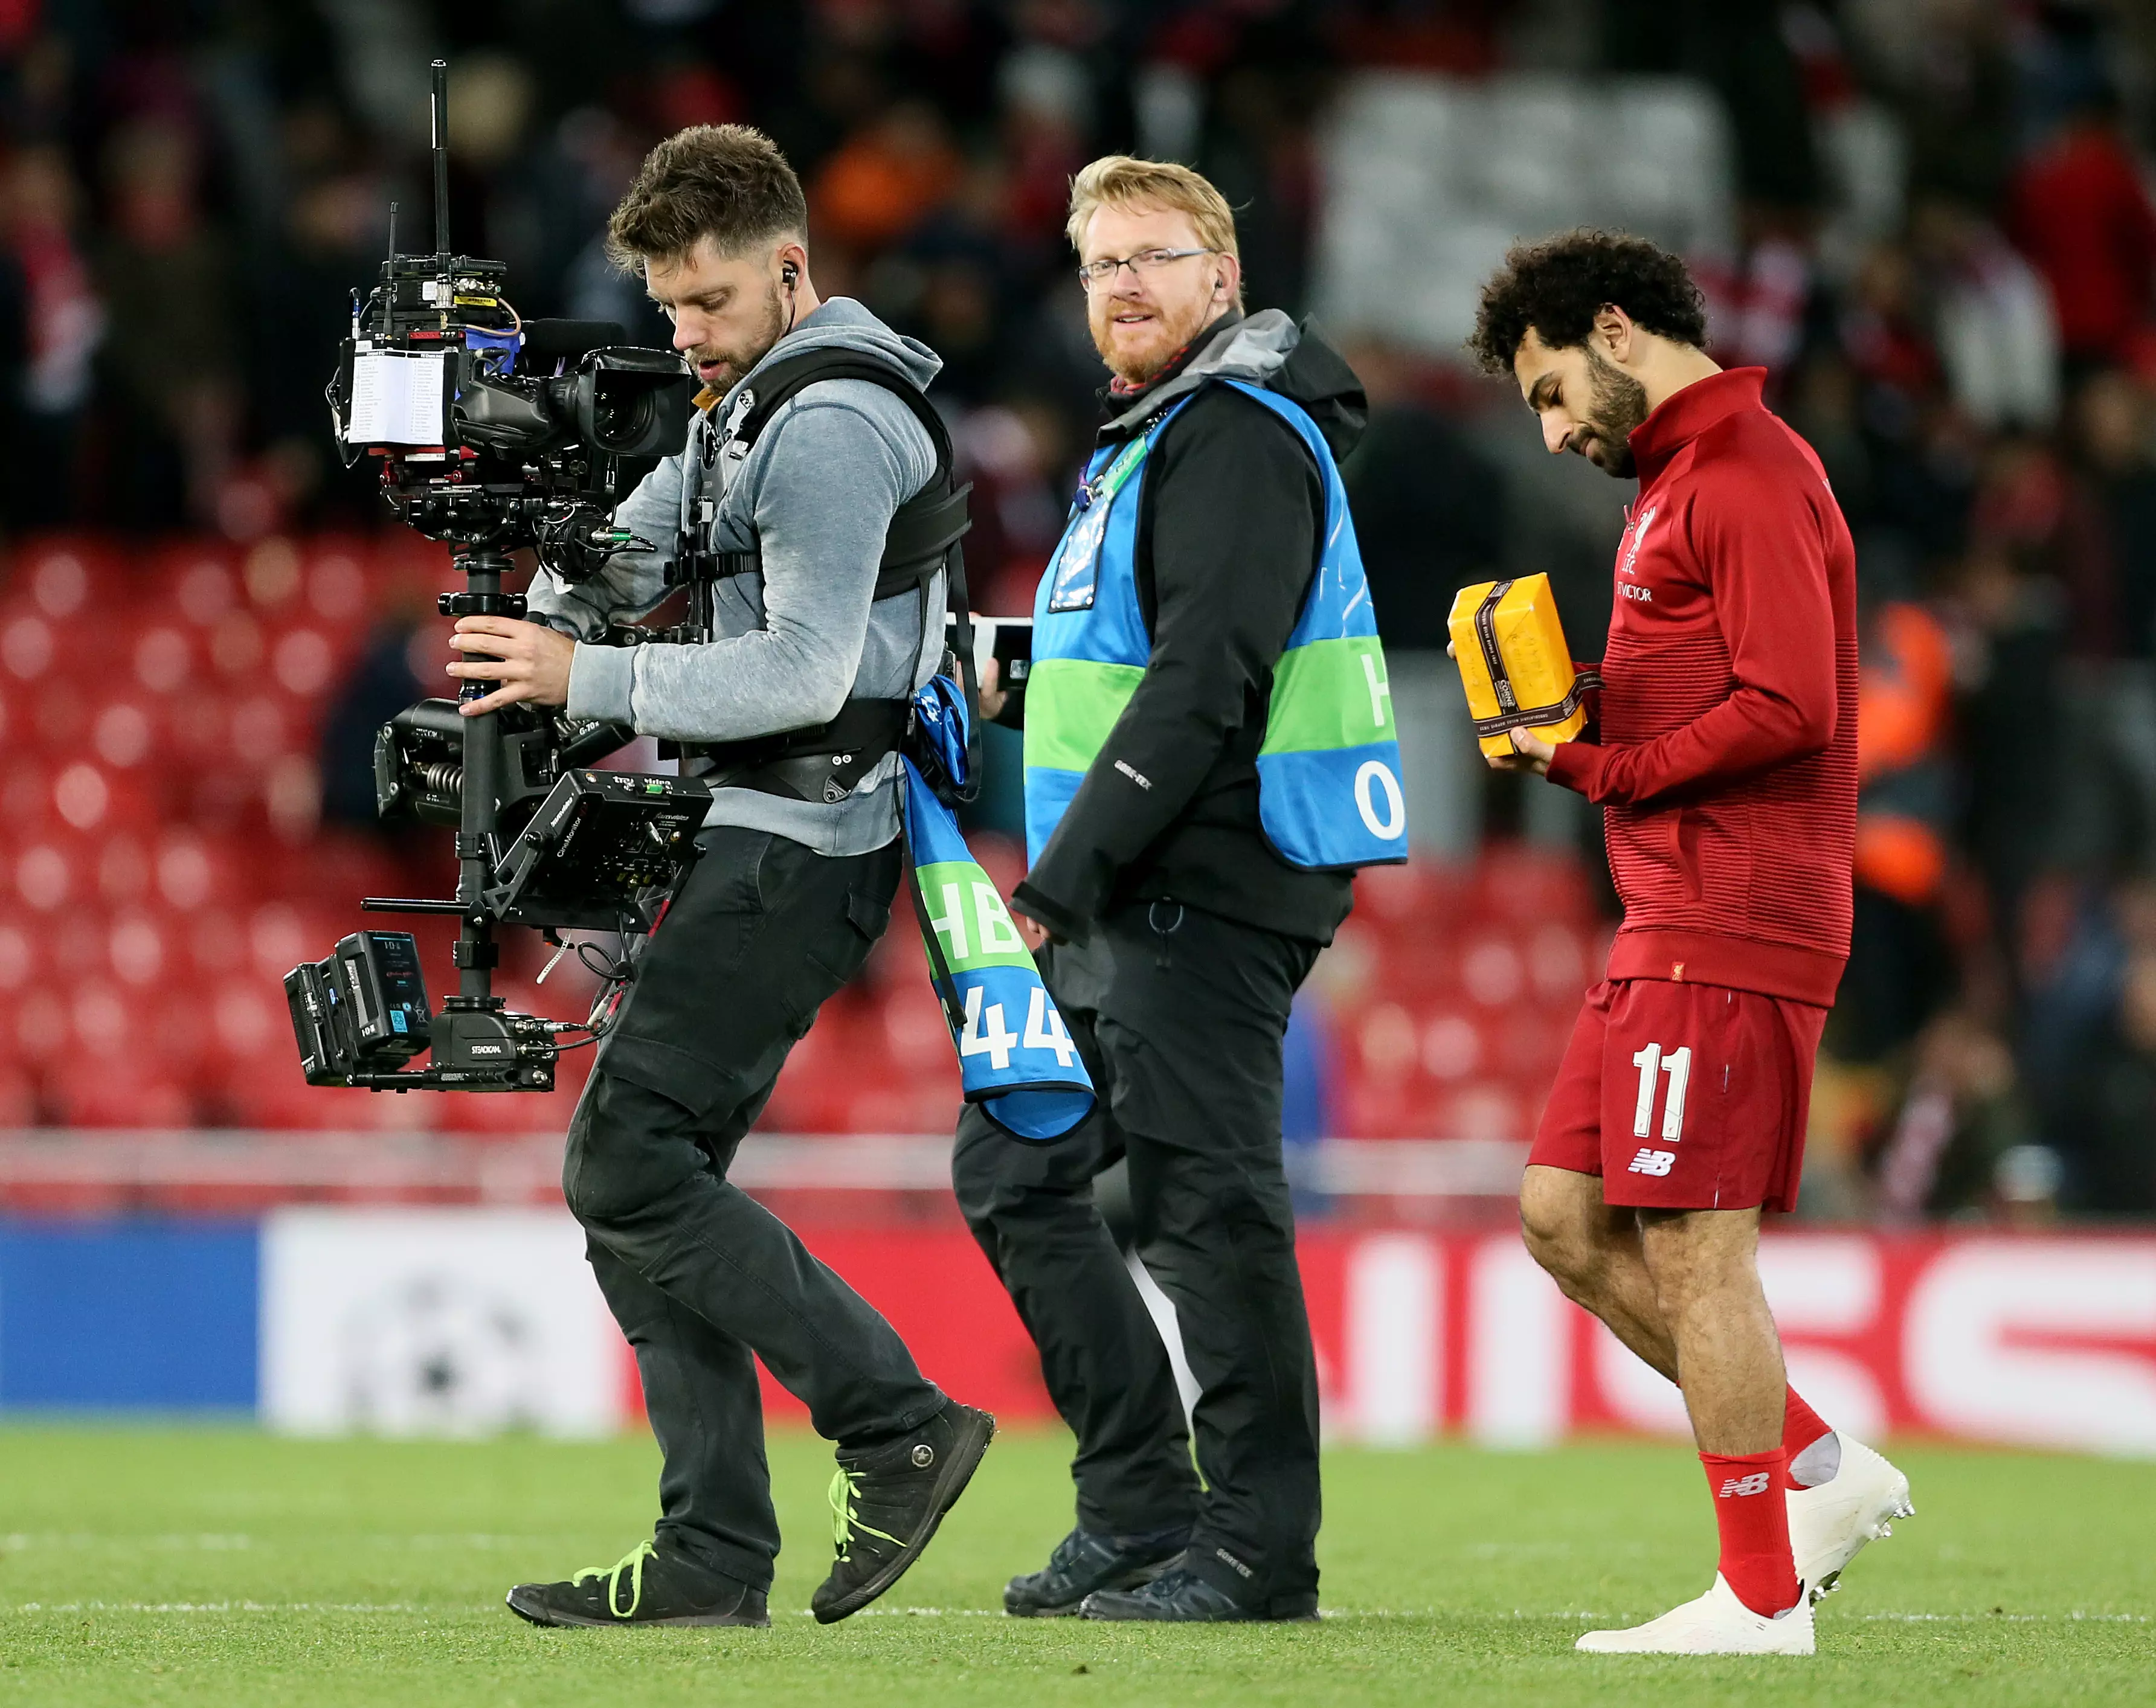 Salah trying to work out if there's any coffee creams in the box. Image: PA Images